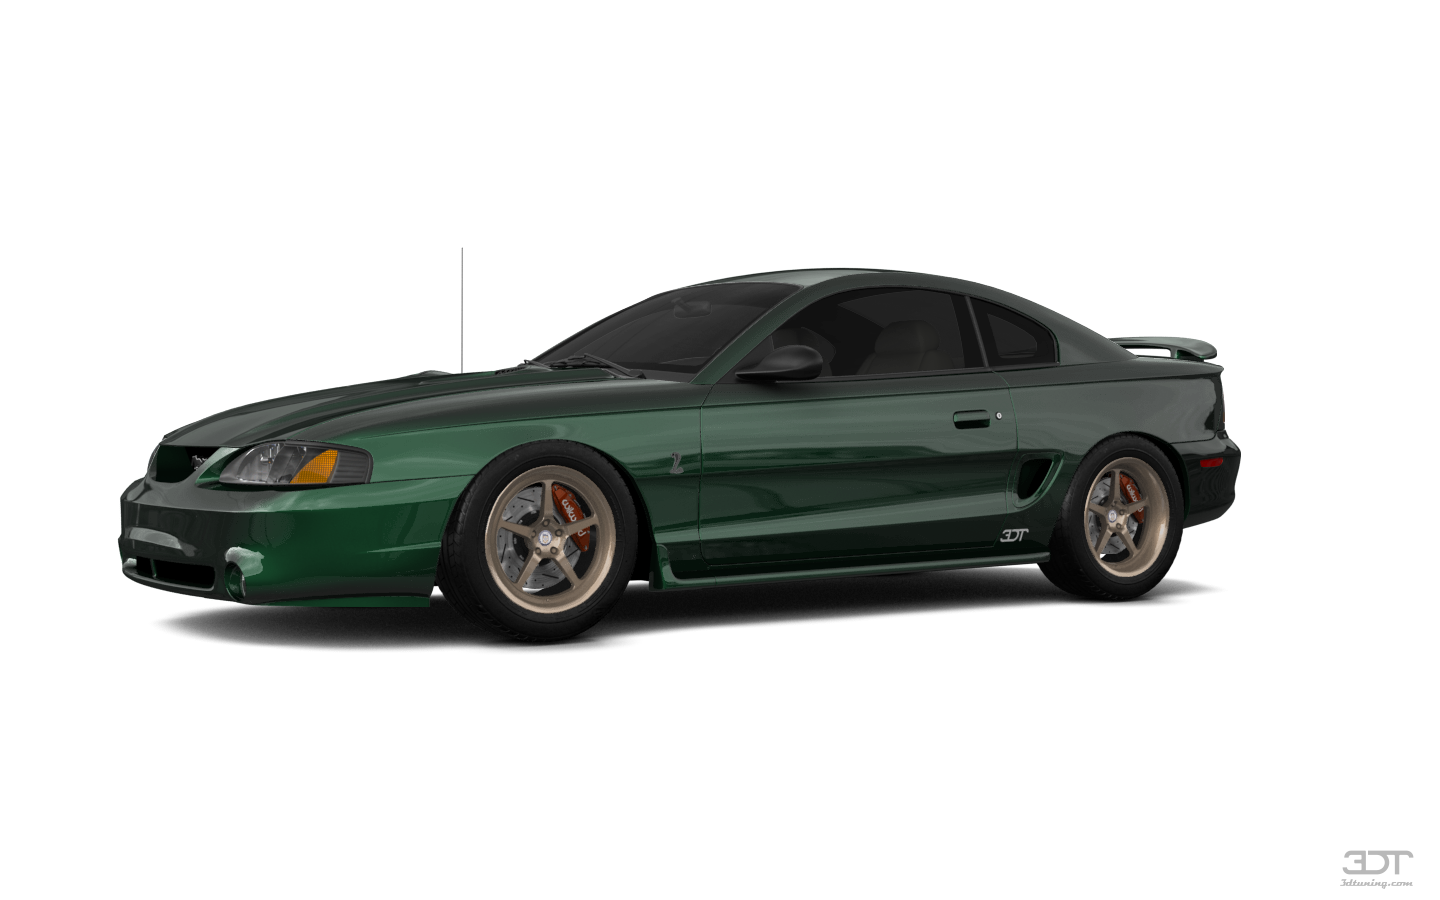 Ford Mustang 2 Door Coupe 1994 tuning